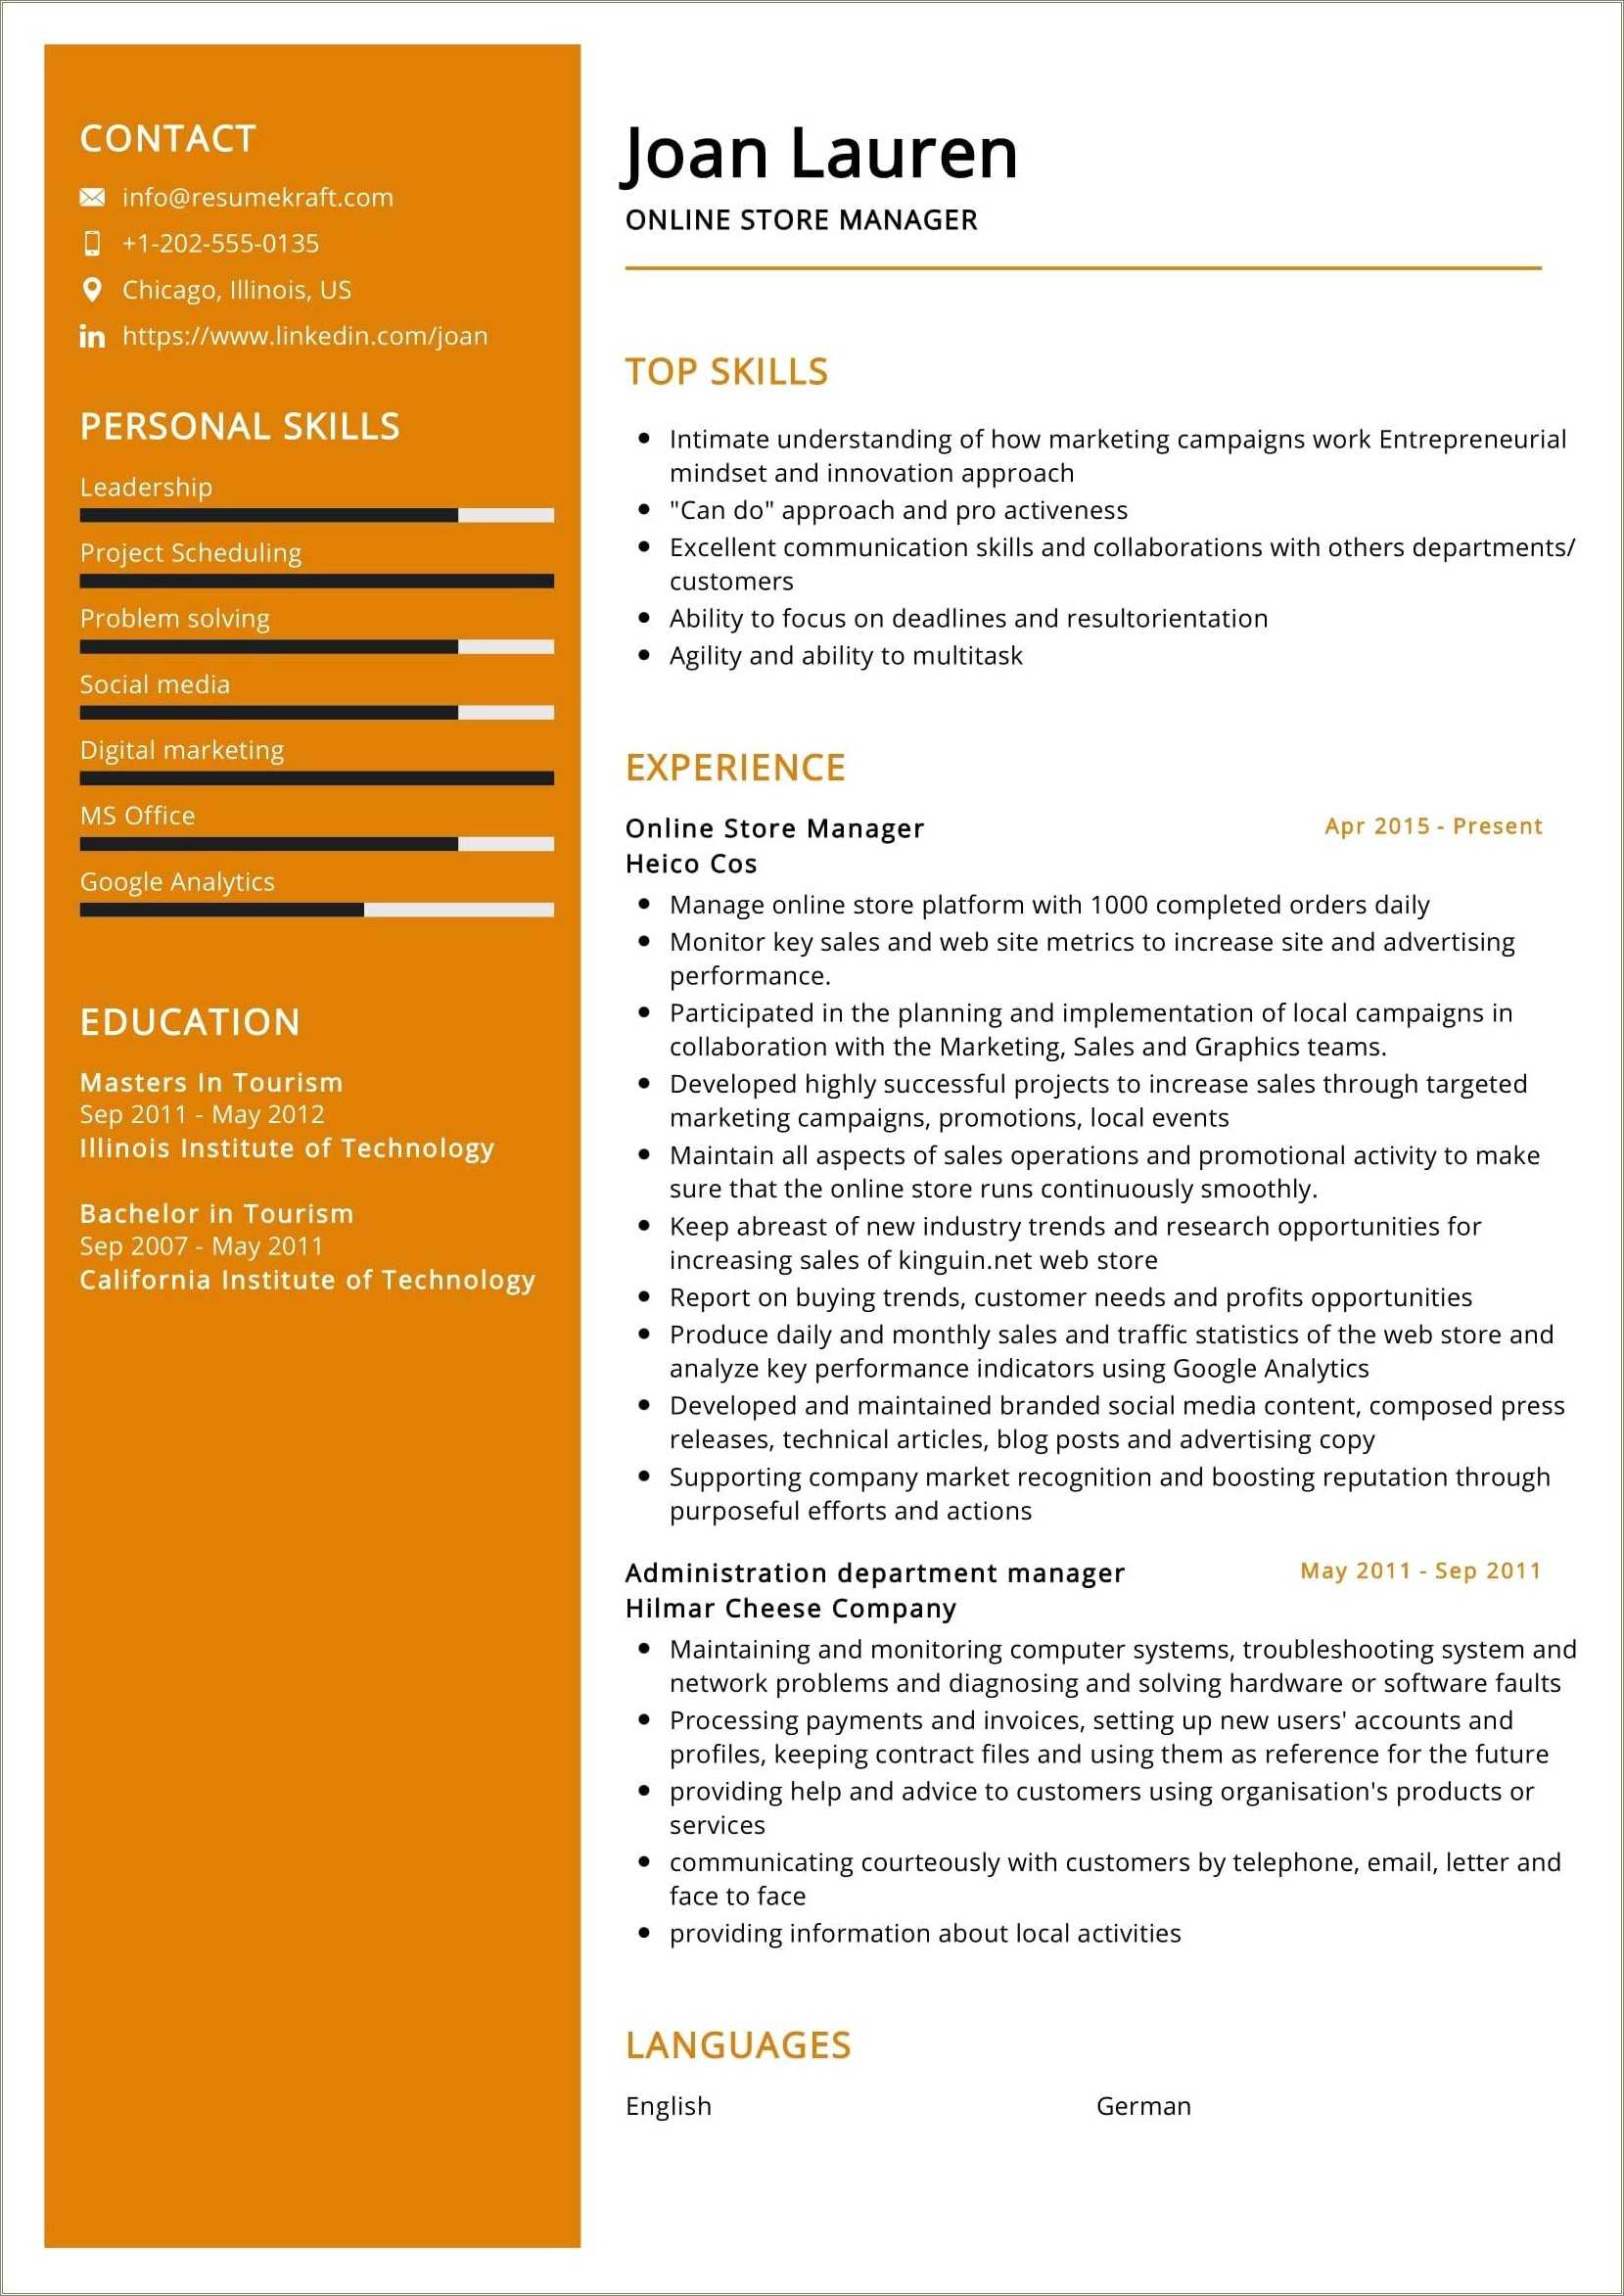 commonly-used-word-synonyms-in-resumes-resume-example-gallery